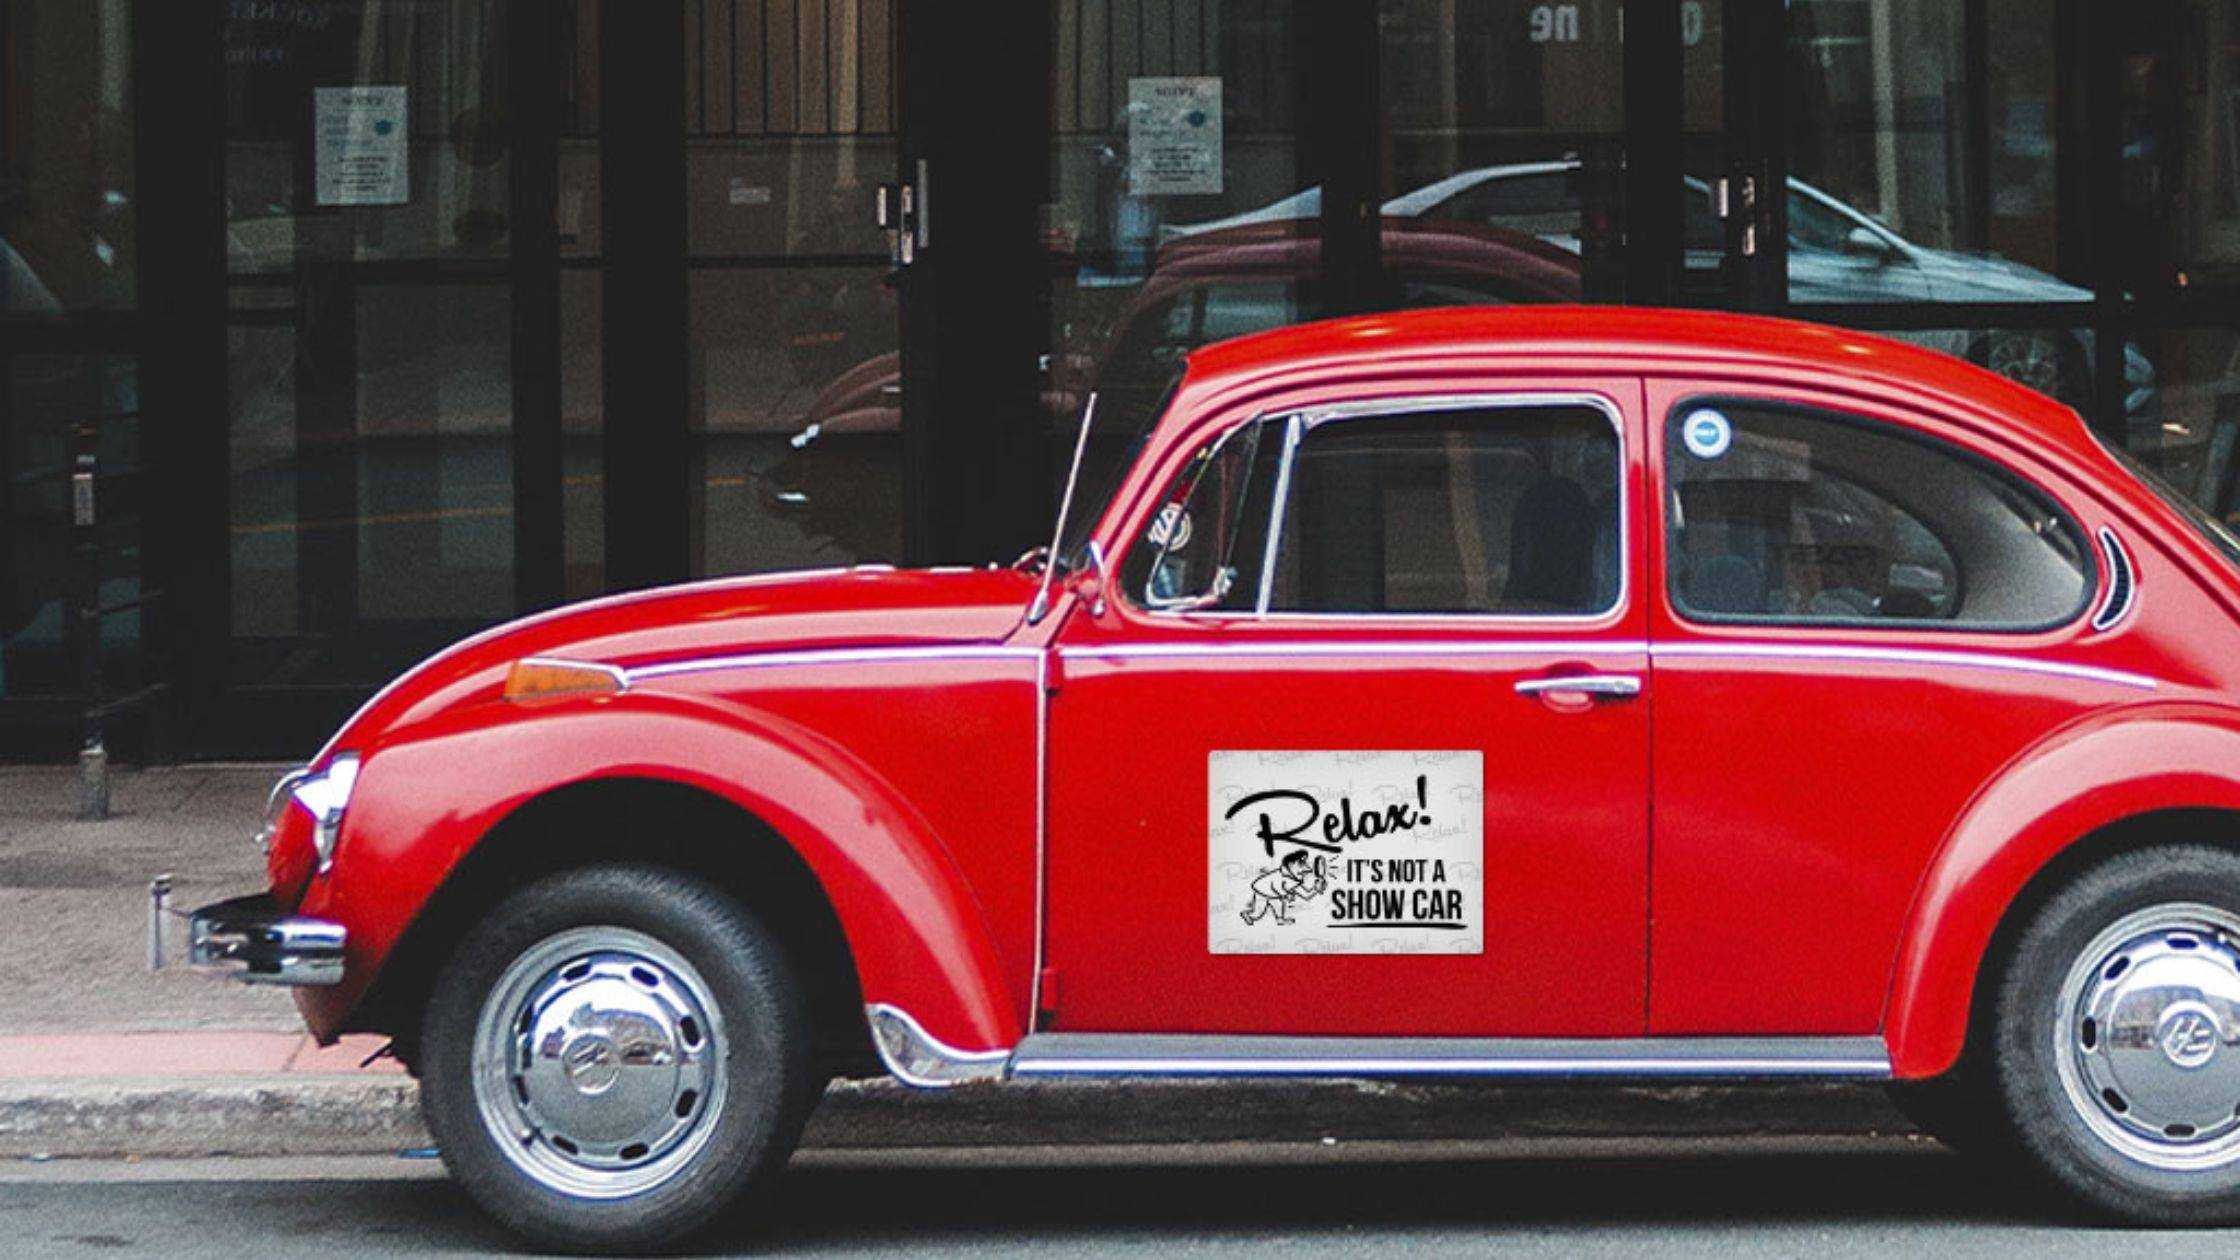 Relax It’s Not a Show Car Sticker: Embracing Imperfection with Style